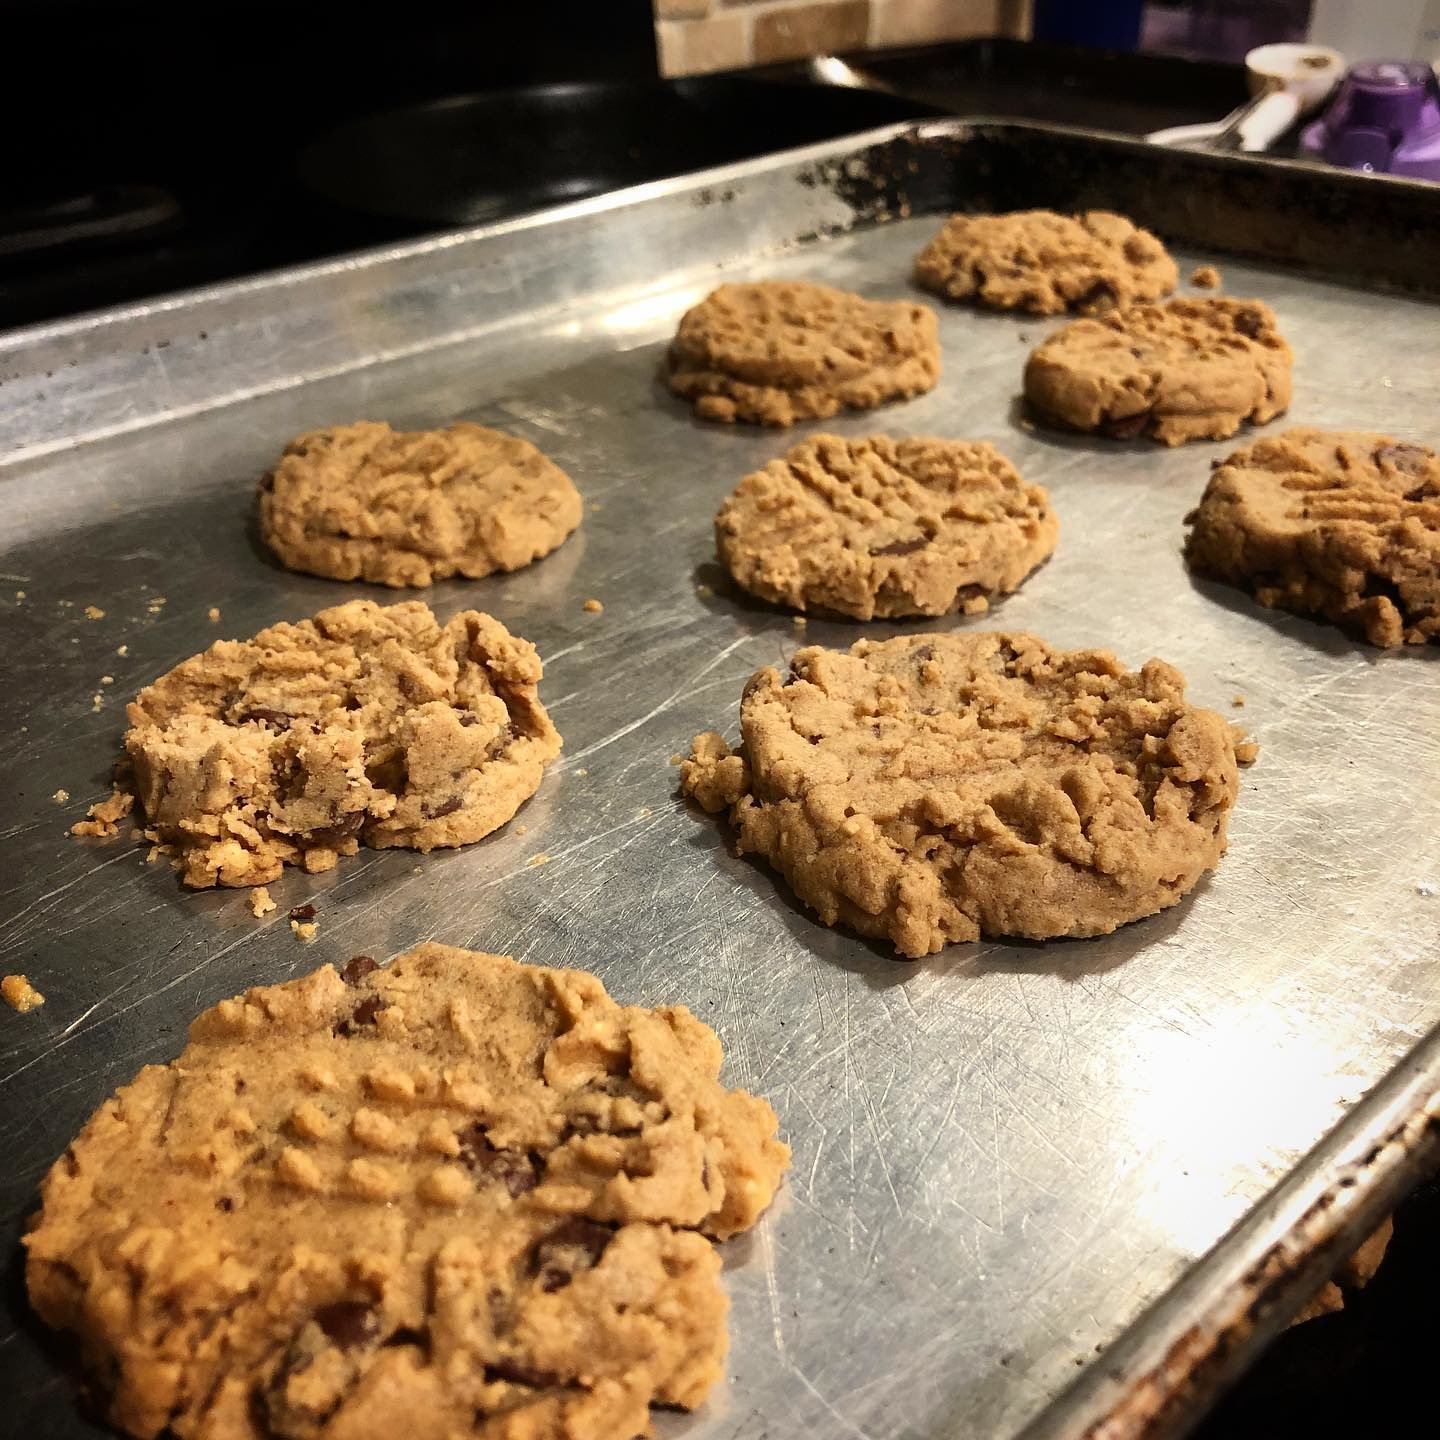 Chocolate chip peanut butter cookies uploaded on October 8, 2020 | Photo: Flickr/Kim Siever